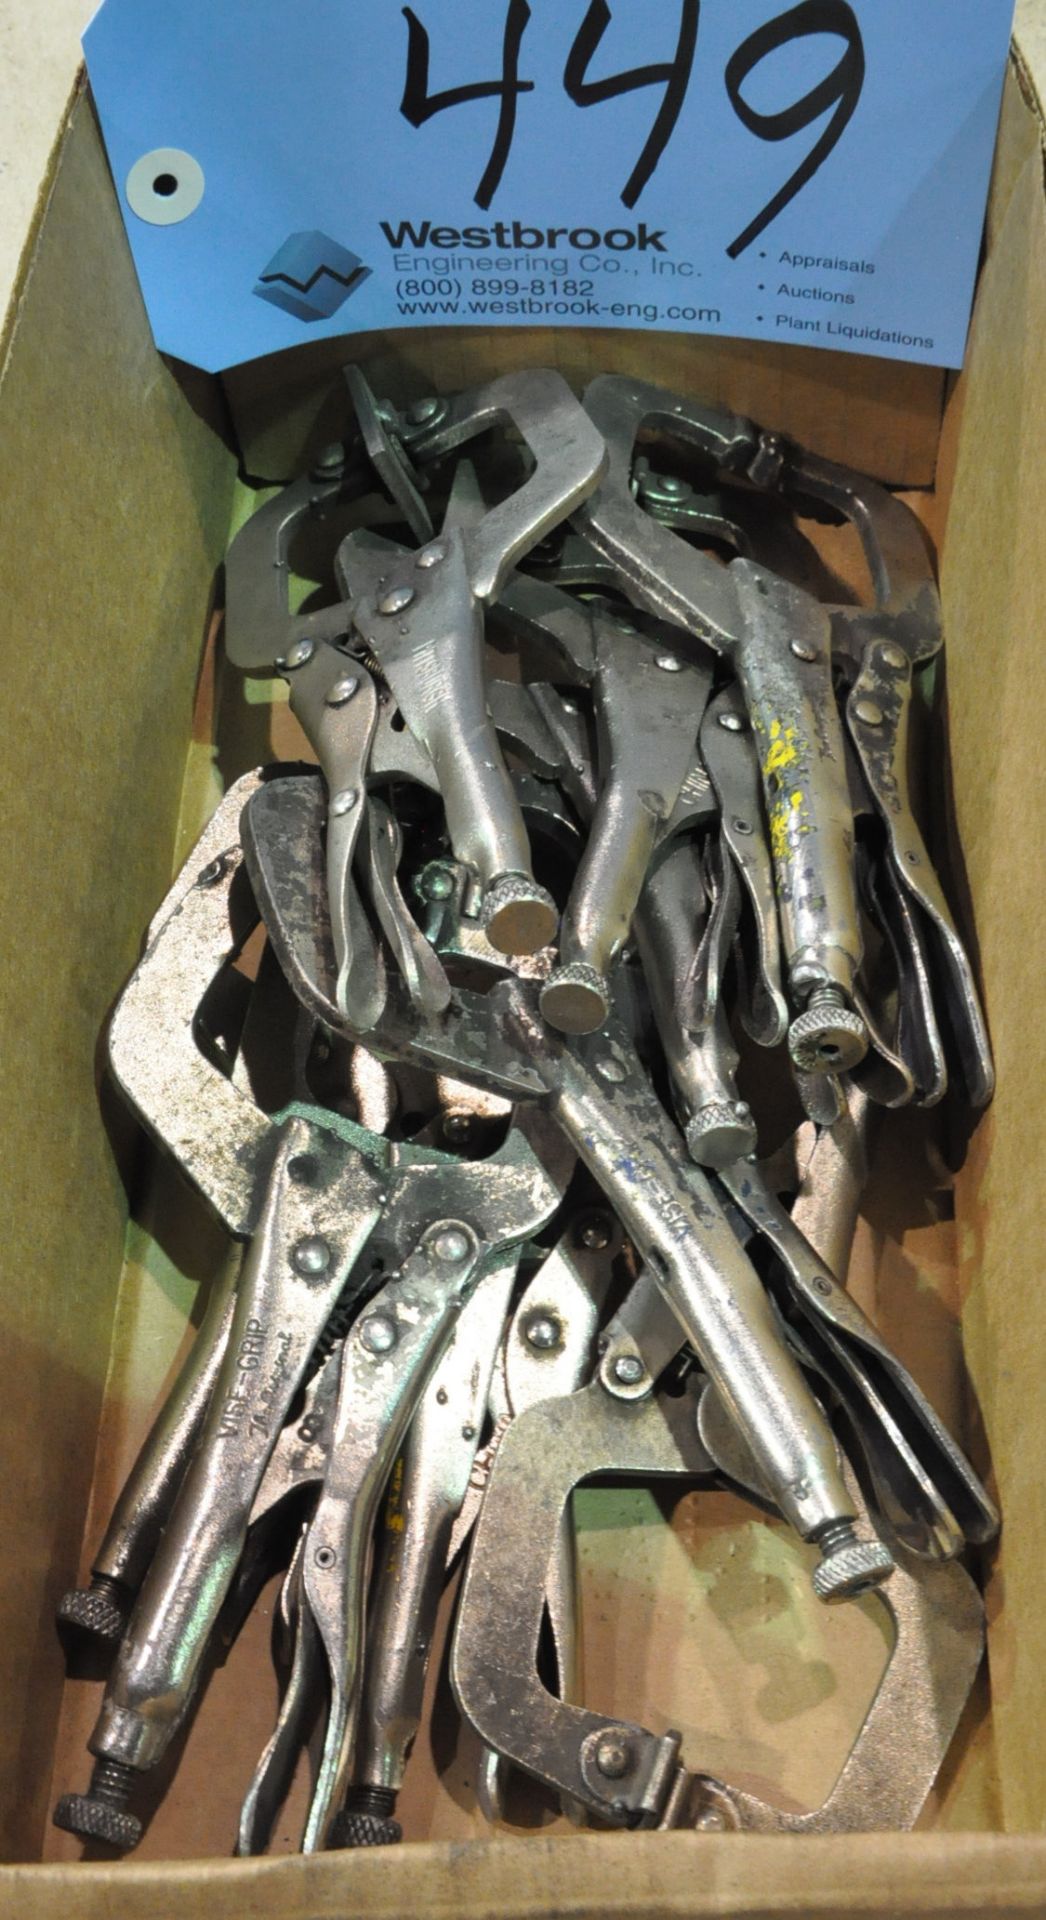 Lot-Vise Grip and Other Brand Pliers in (1) Box